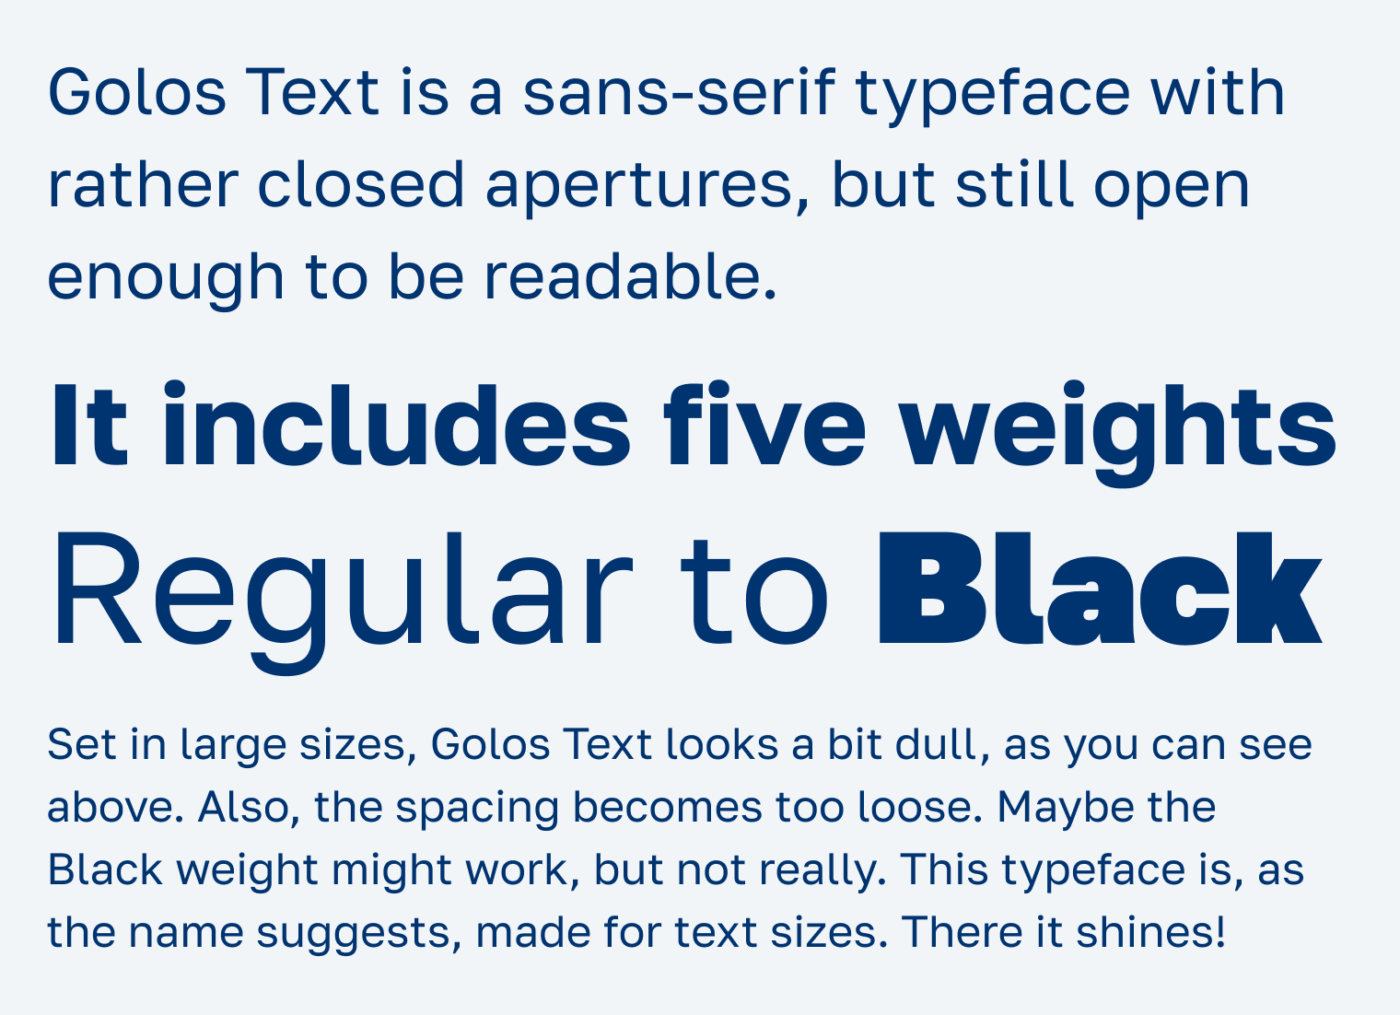 Golos Text is a sans-serif typeface with rather closed apertures, but still open enough to be readable. It includes five weights Regular to Black. Set in large sizes, Golos Text looks a bit dull, as you can see above. Also, the spacing becomes too loose. Maybe the Black weight might work, but not really. This typeface is, as the name suggests, made for text sizes. There it shines! 